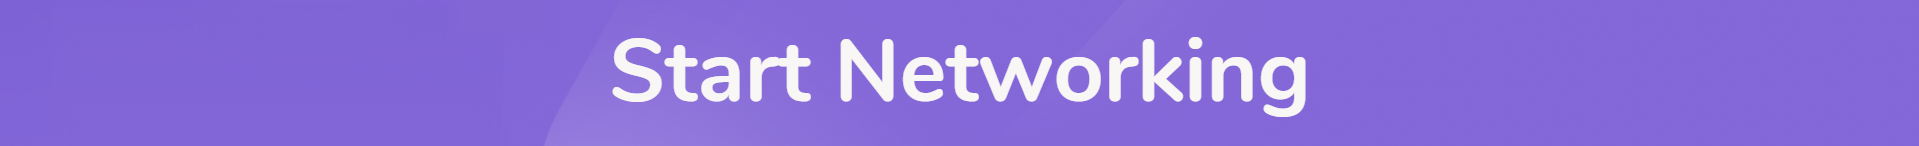 Start networking banner.png